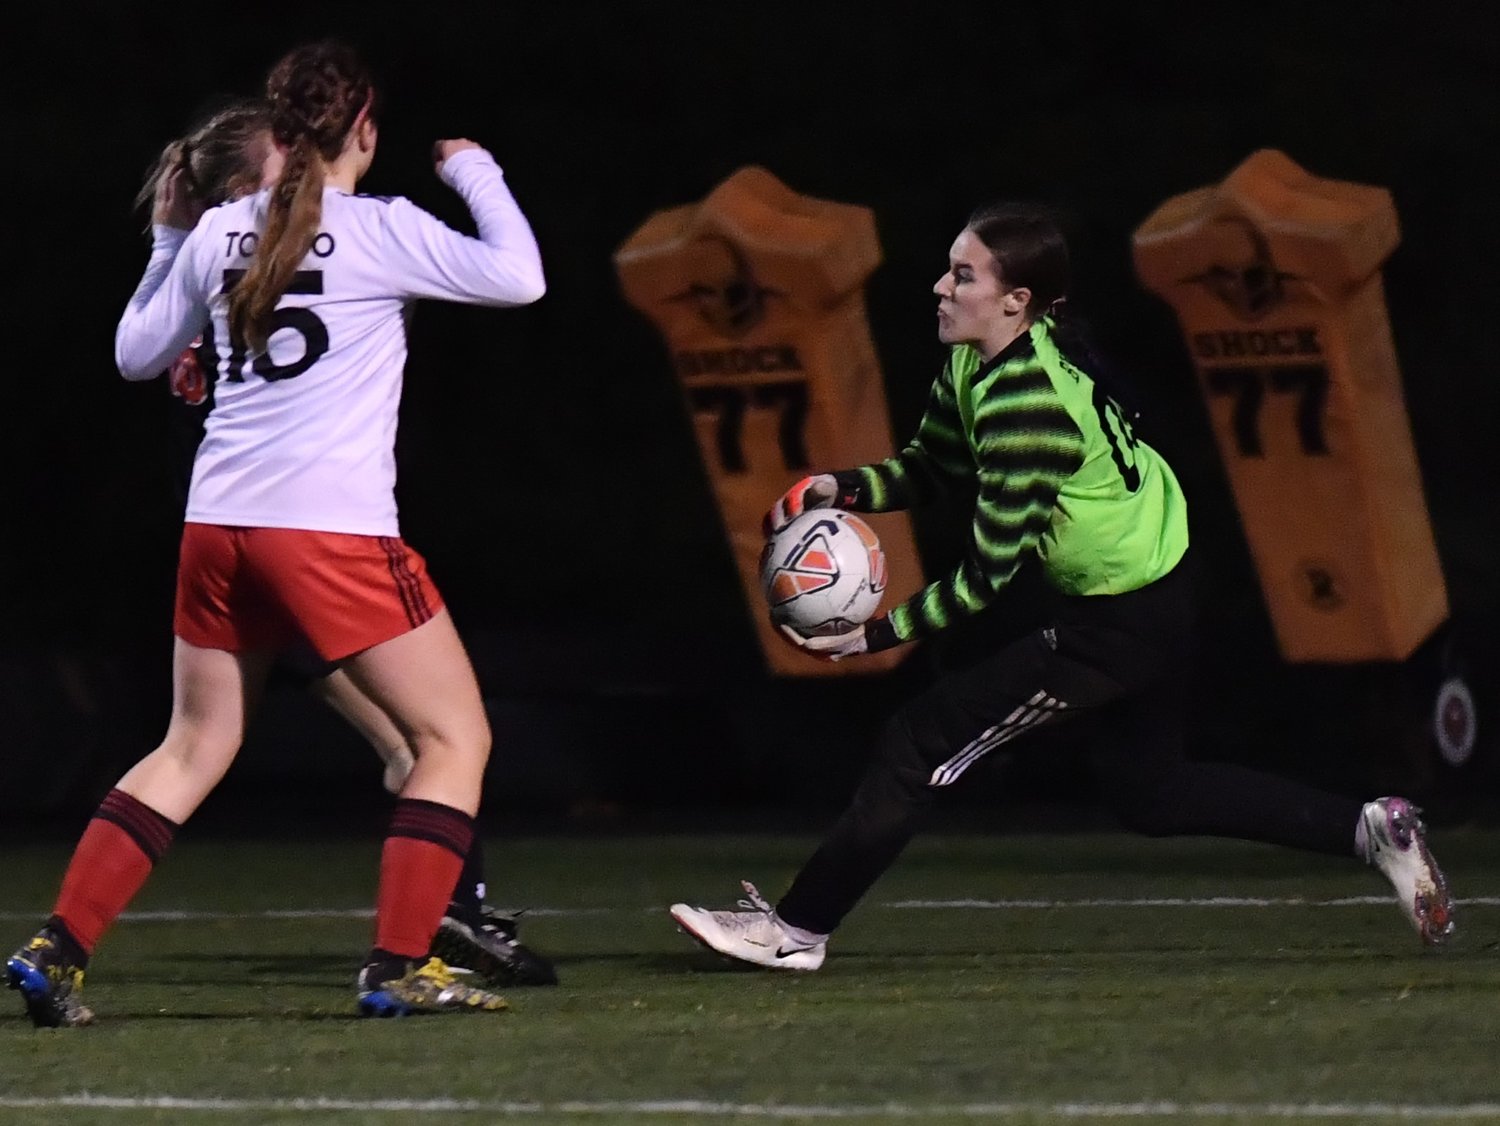 Toledo keeper Daphnie Bybee makes s save in the Riverhawks 3-0 loss to Kalama in the district semifinals Nov. 4.